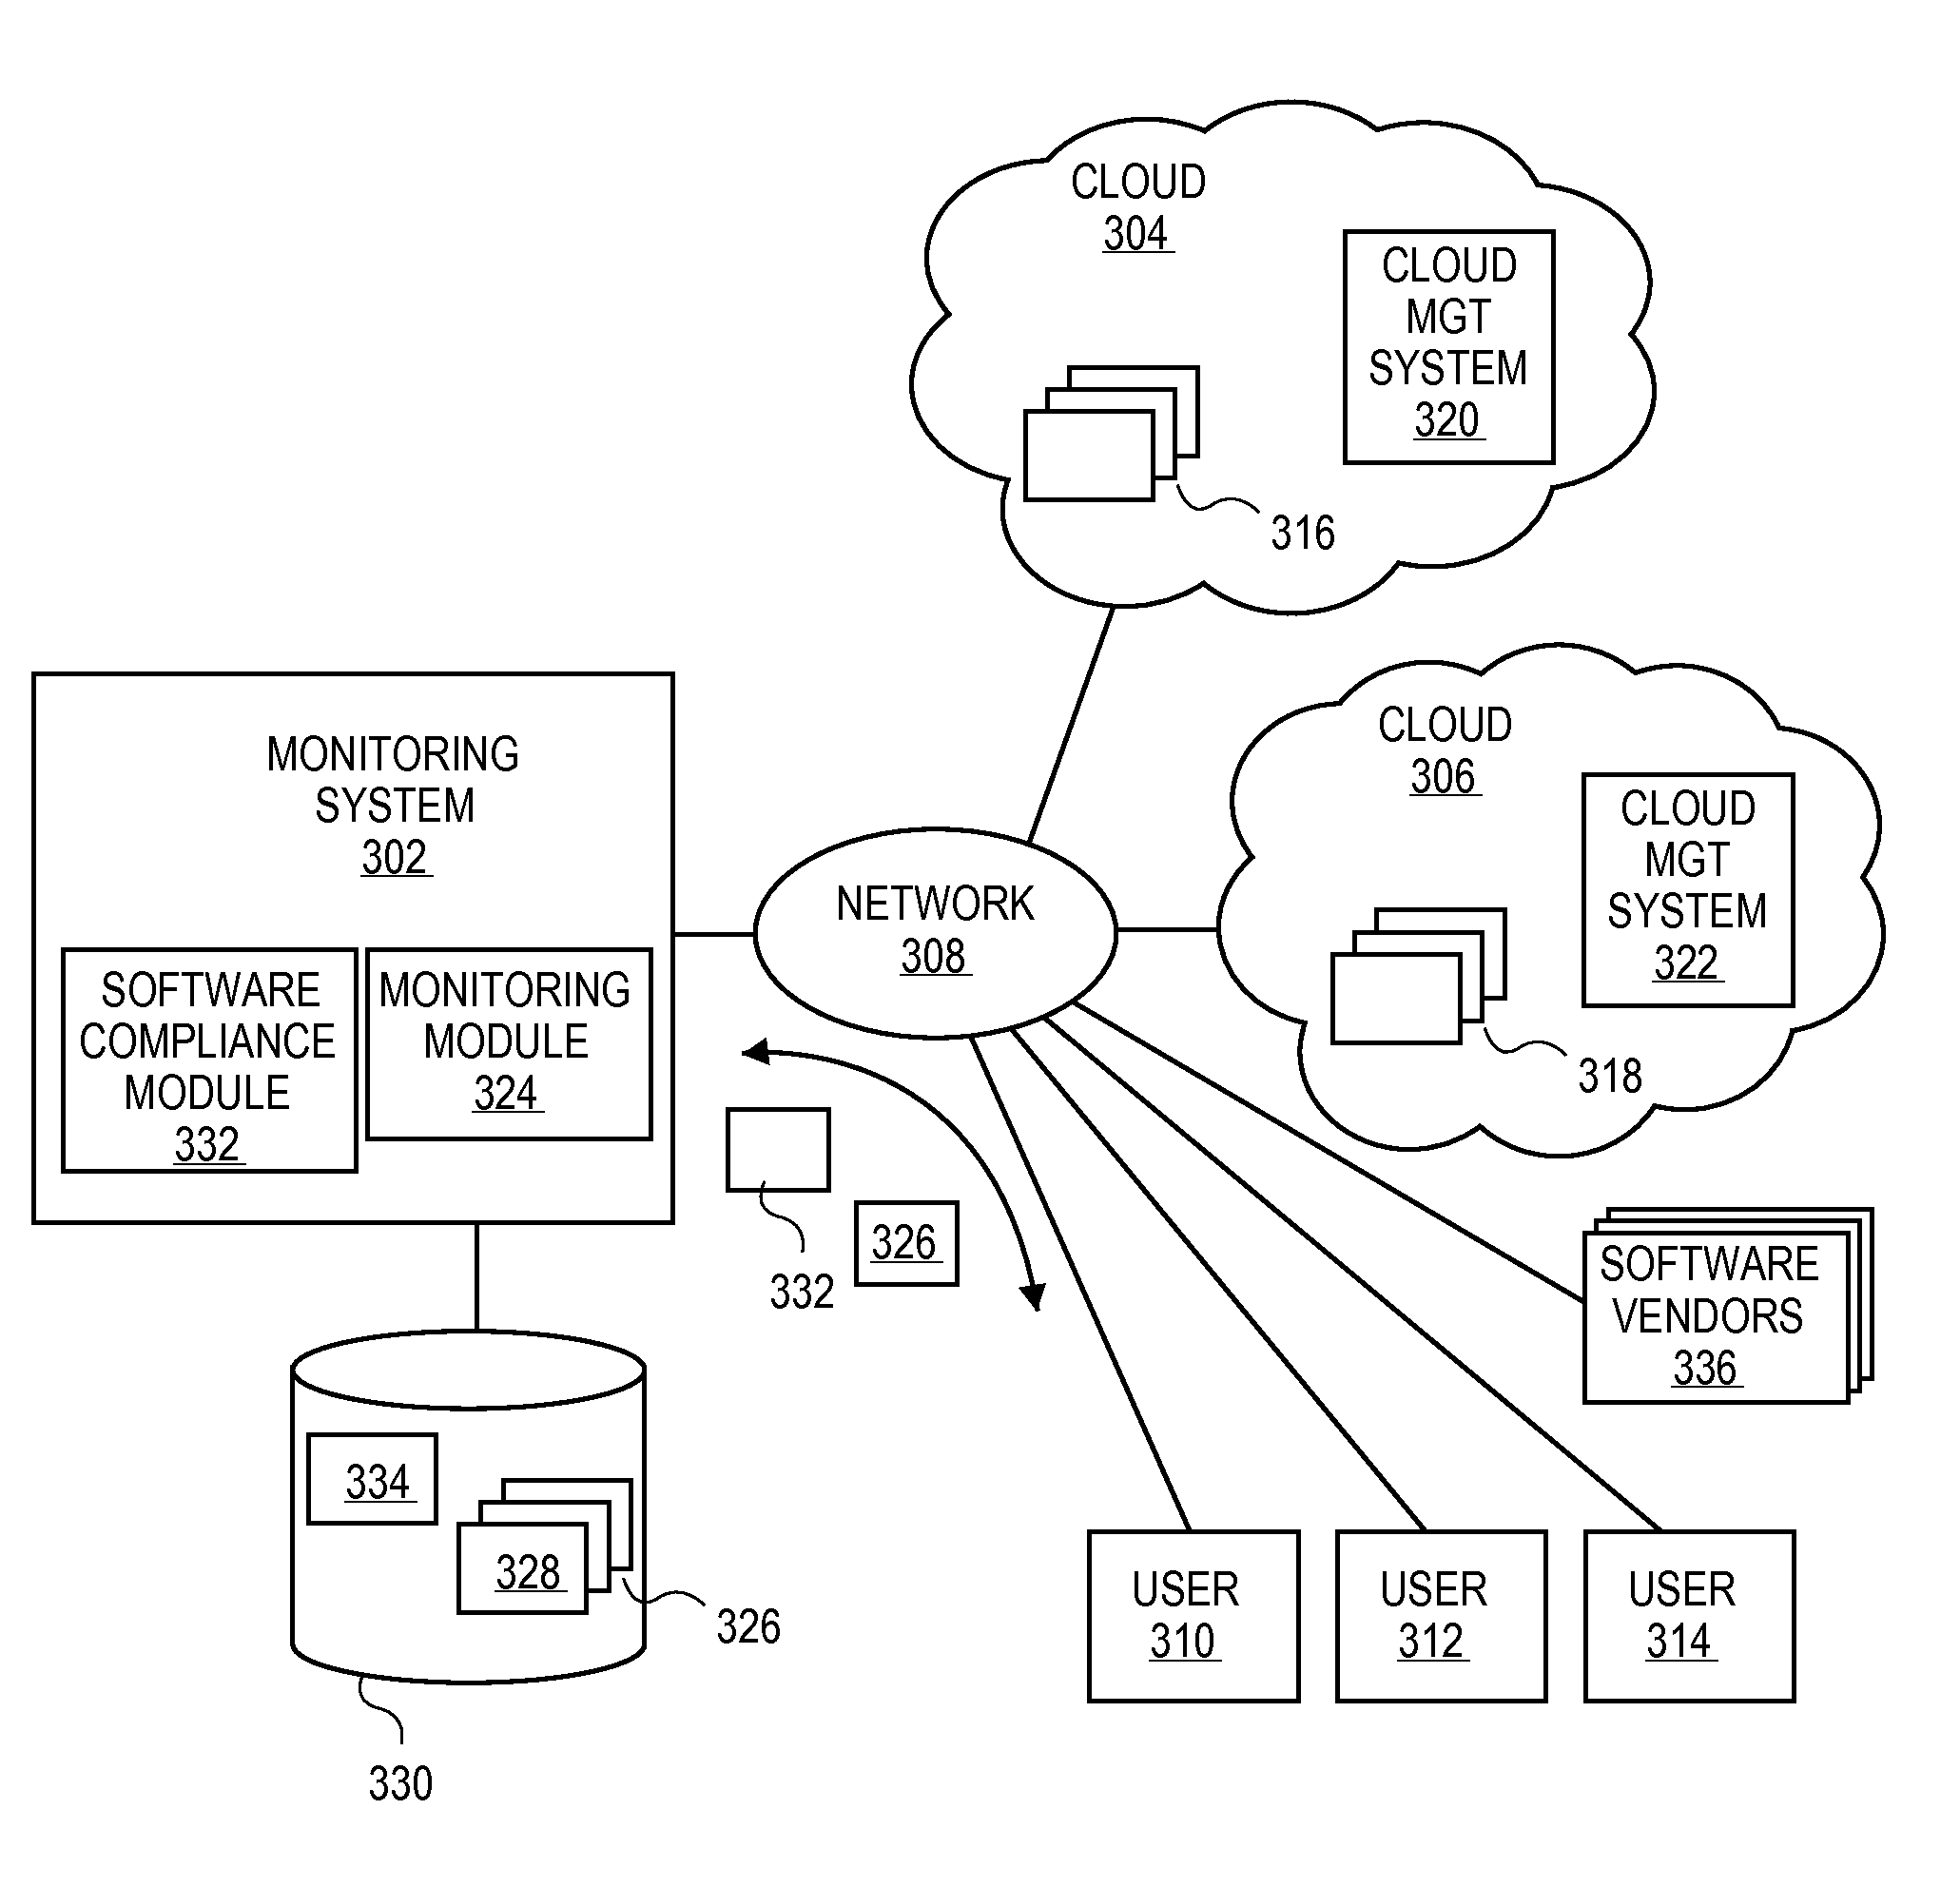 Methods and systems for generating a software license knowledge base for verifying software license compliance in cloud computing environments